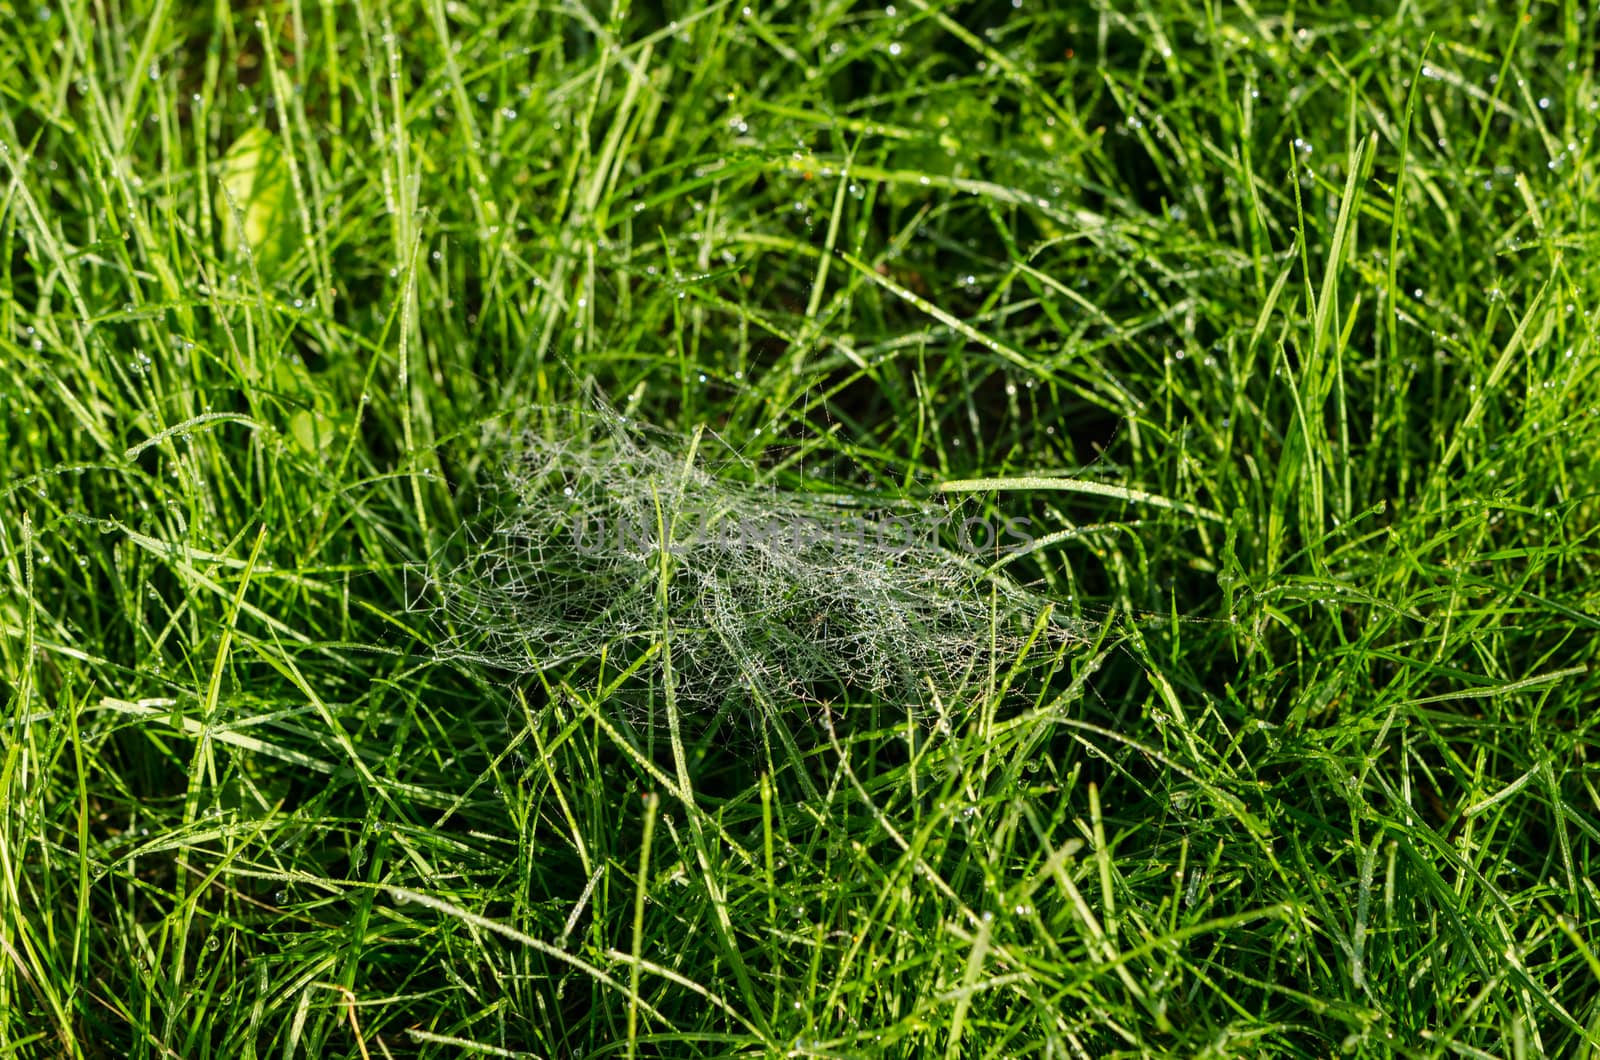 small spiders web full of dew drops in the meadow by sauletas